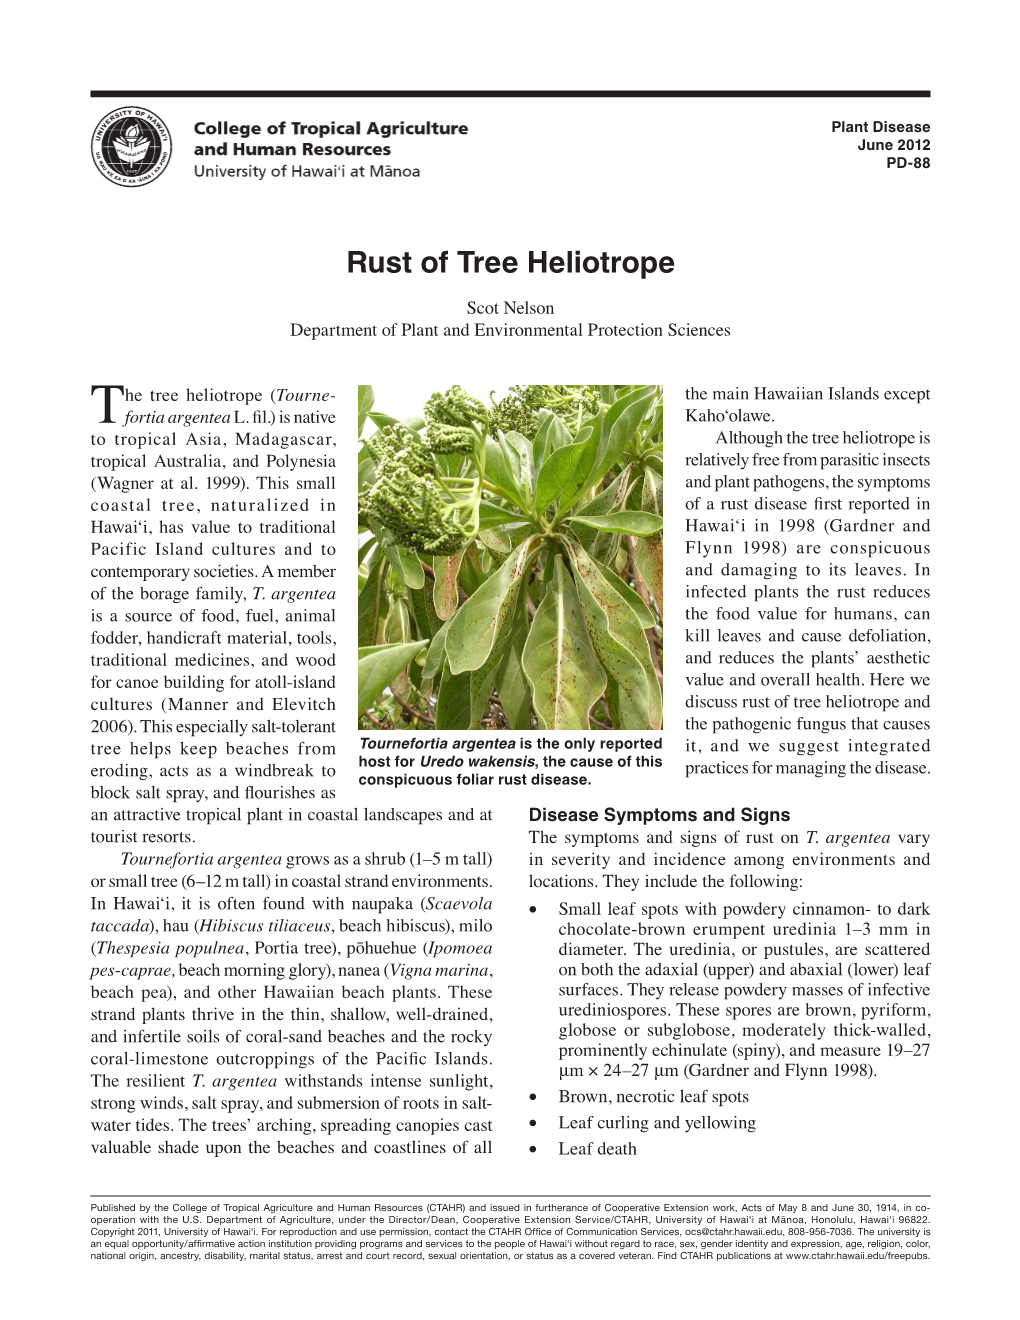 Rust of Tree Heliotrope Scot Nelson Department of Plant and Environmental Protection Sciences